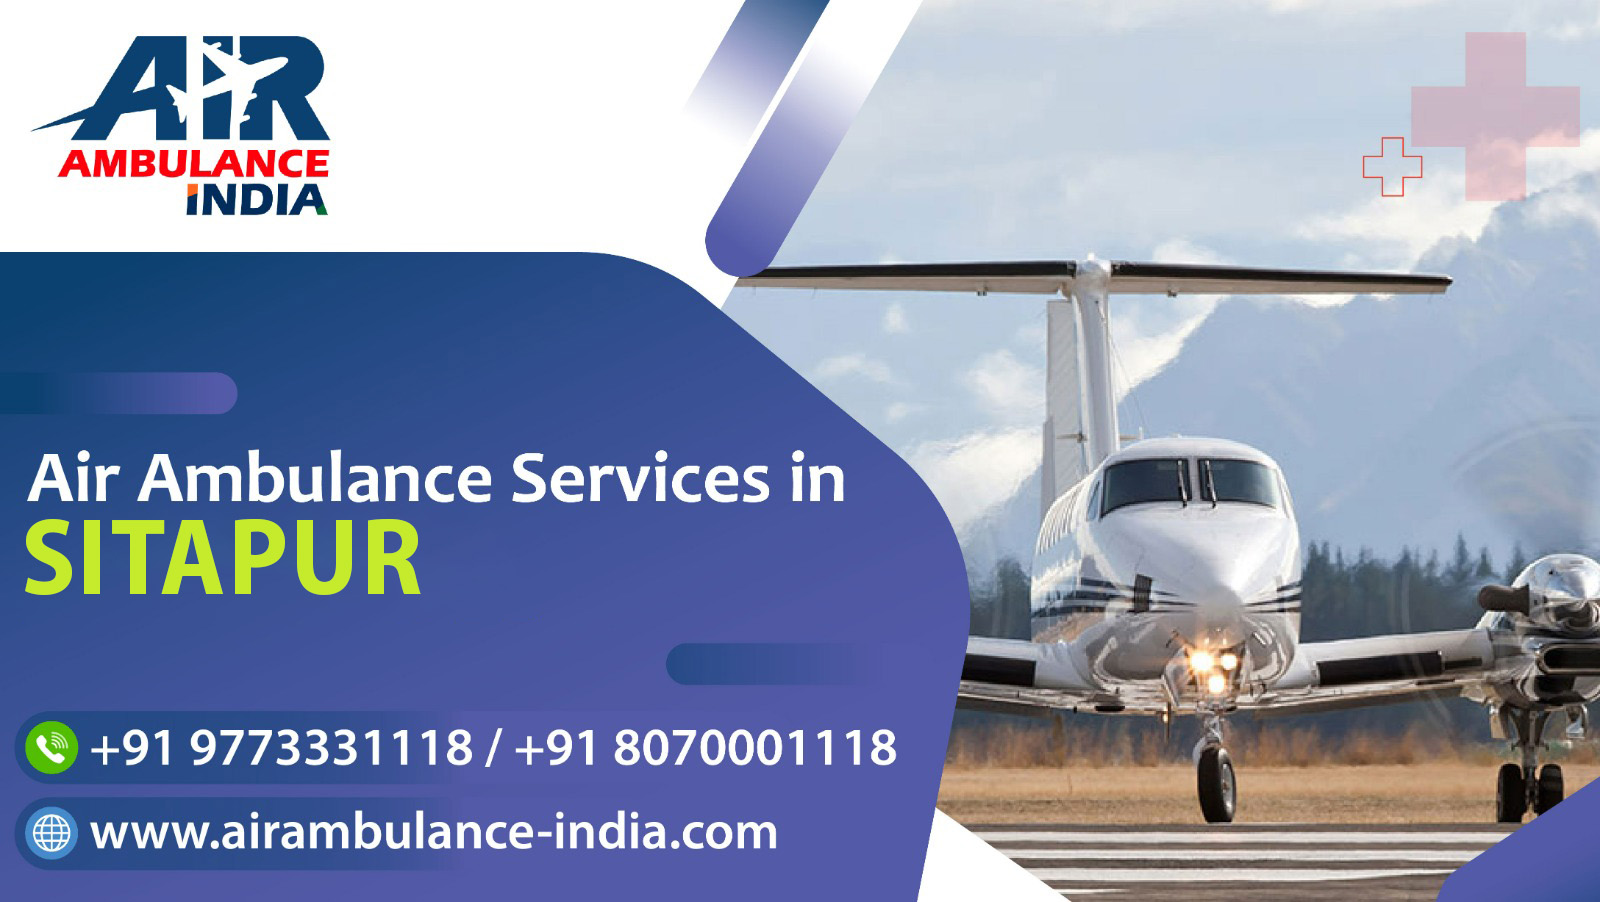 Air Ambulance Services in Sitapur